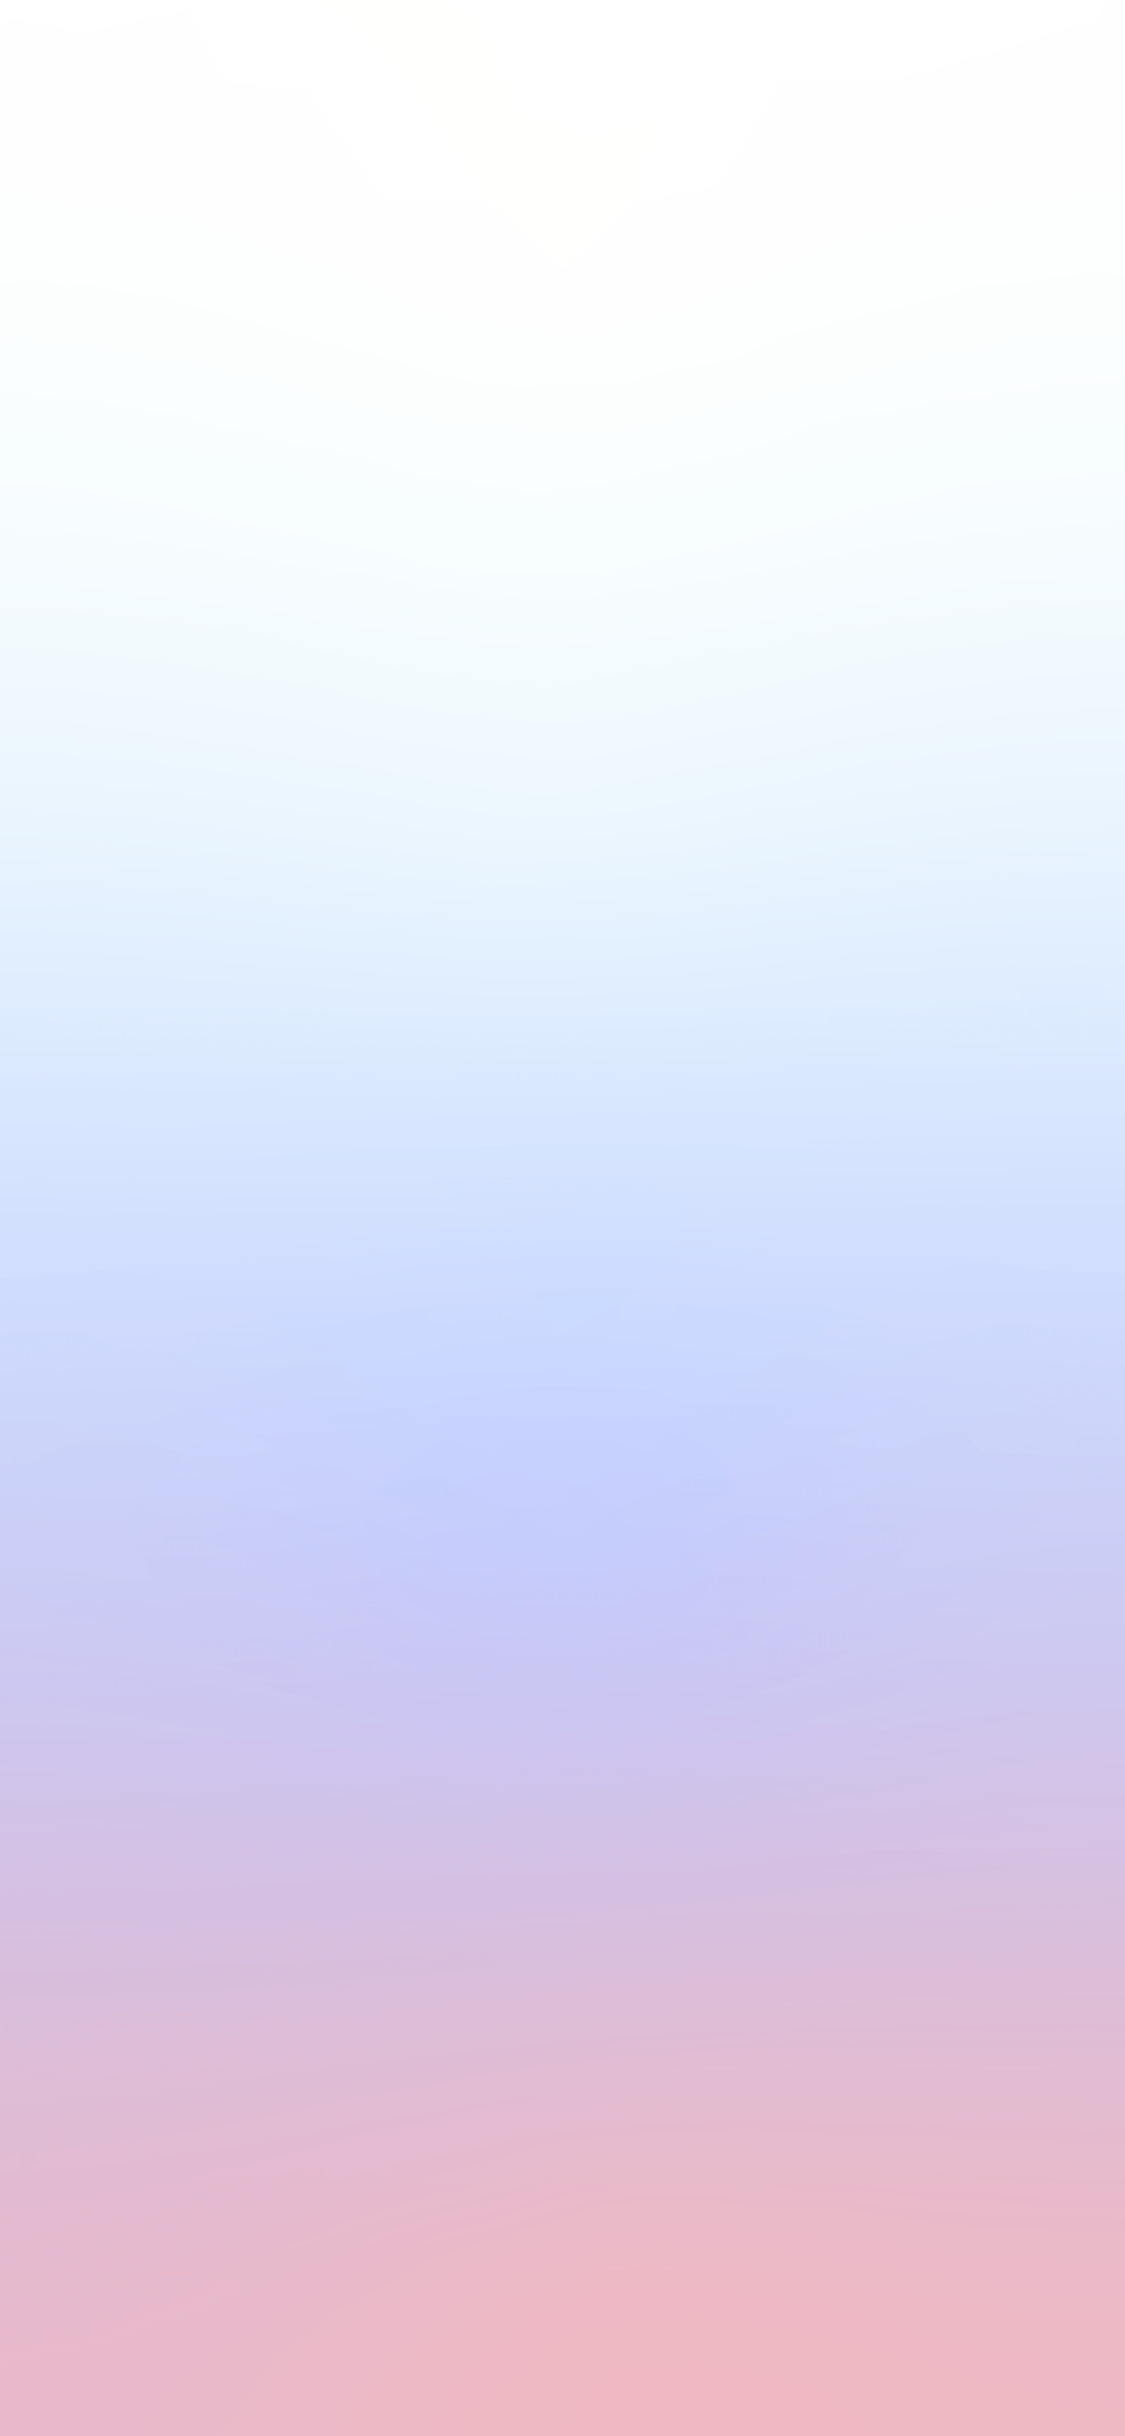 Free download clean and soft aesthetic gradient wallpaper for iphone [1125x2436] for your Desktop, Mobile & Tablet. Explore Gradient Aesthetic Wallpaper. Blue Gradient Wallpaper, Gradient Wallpaper, Wallpaper Gradient